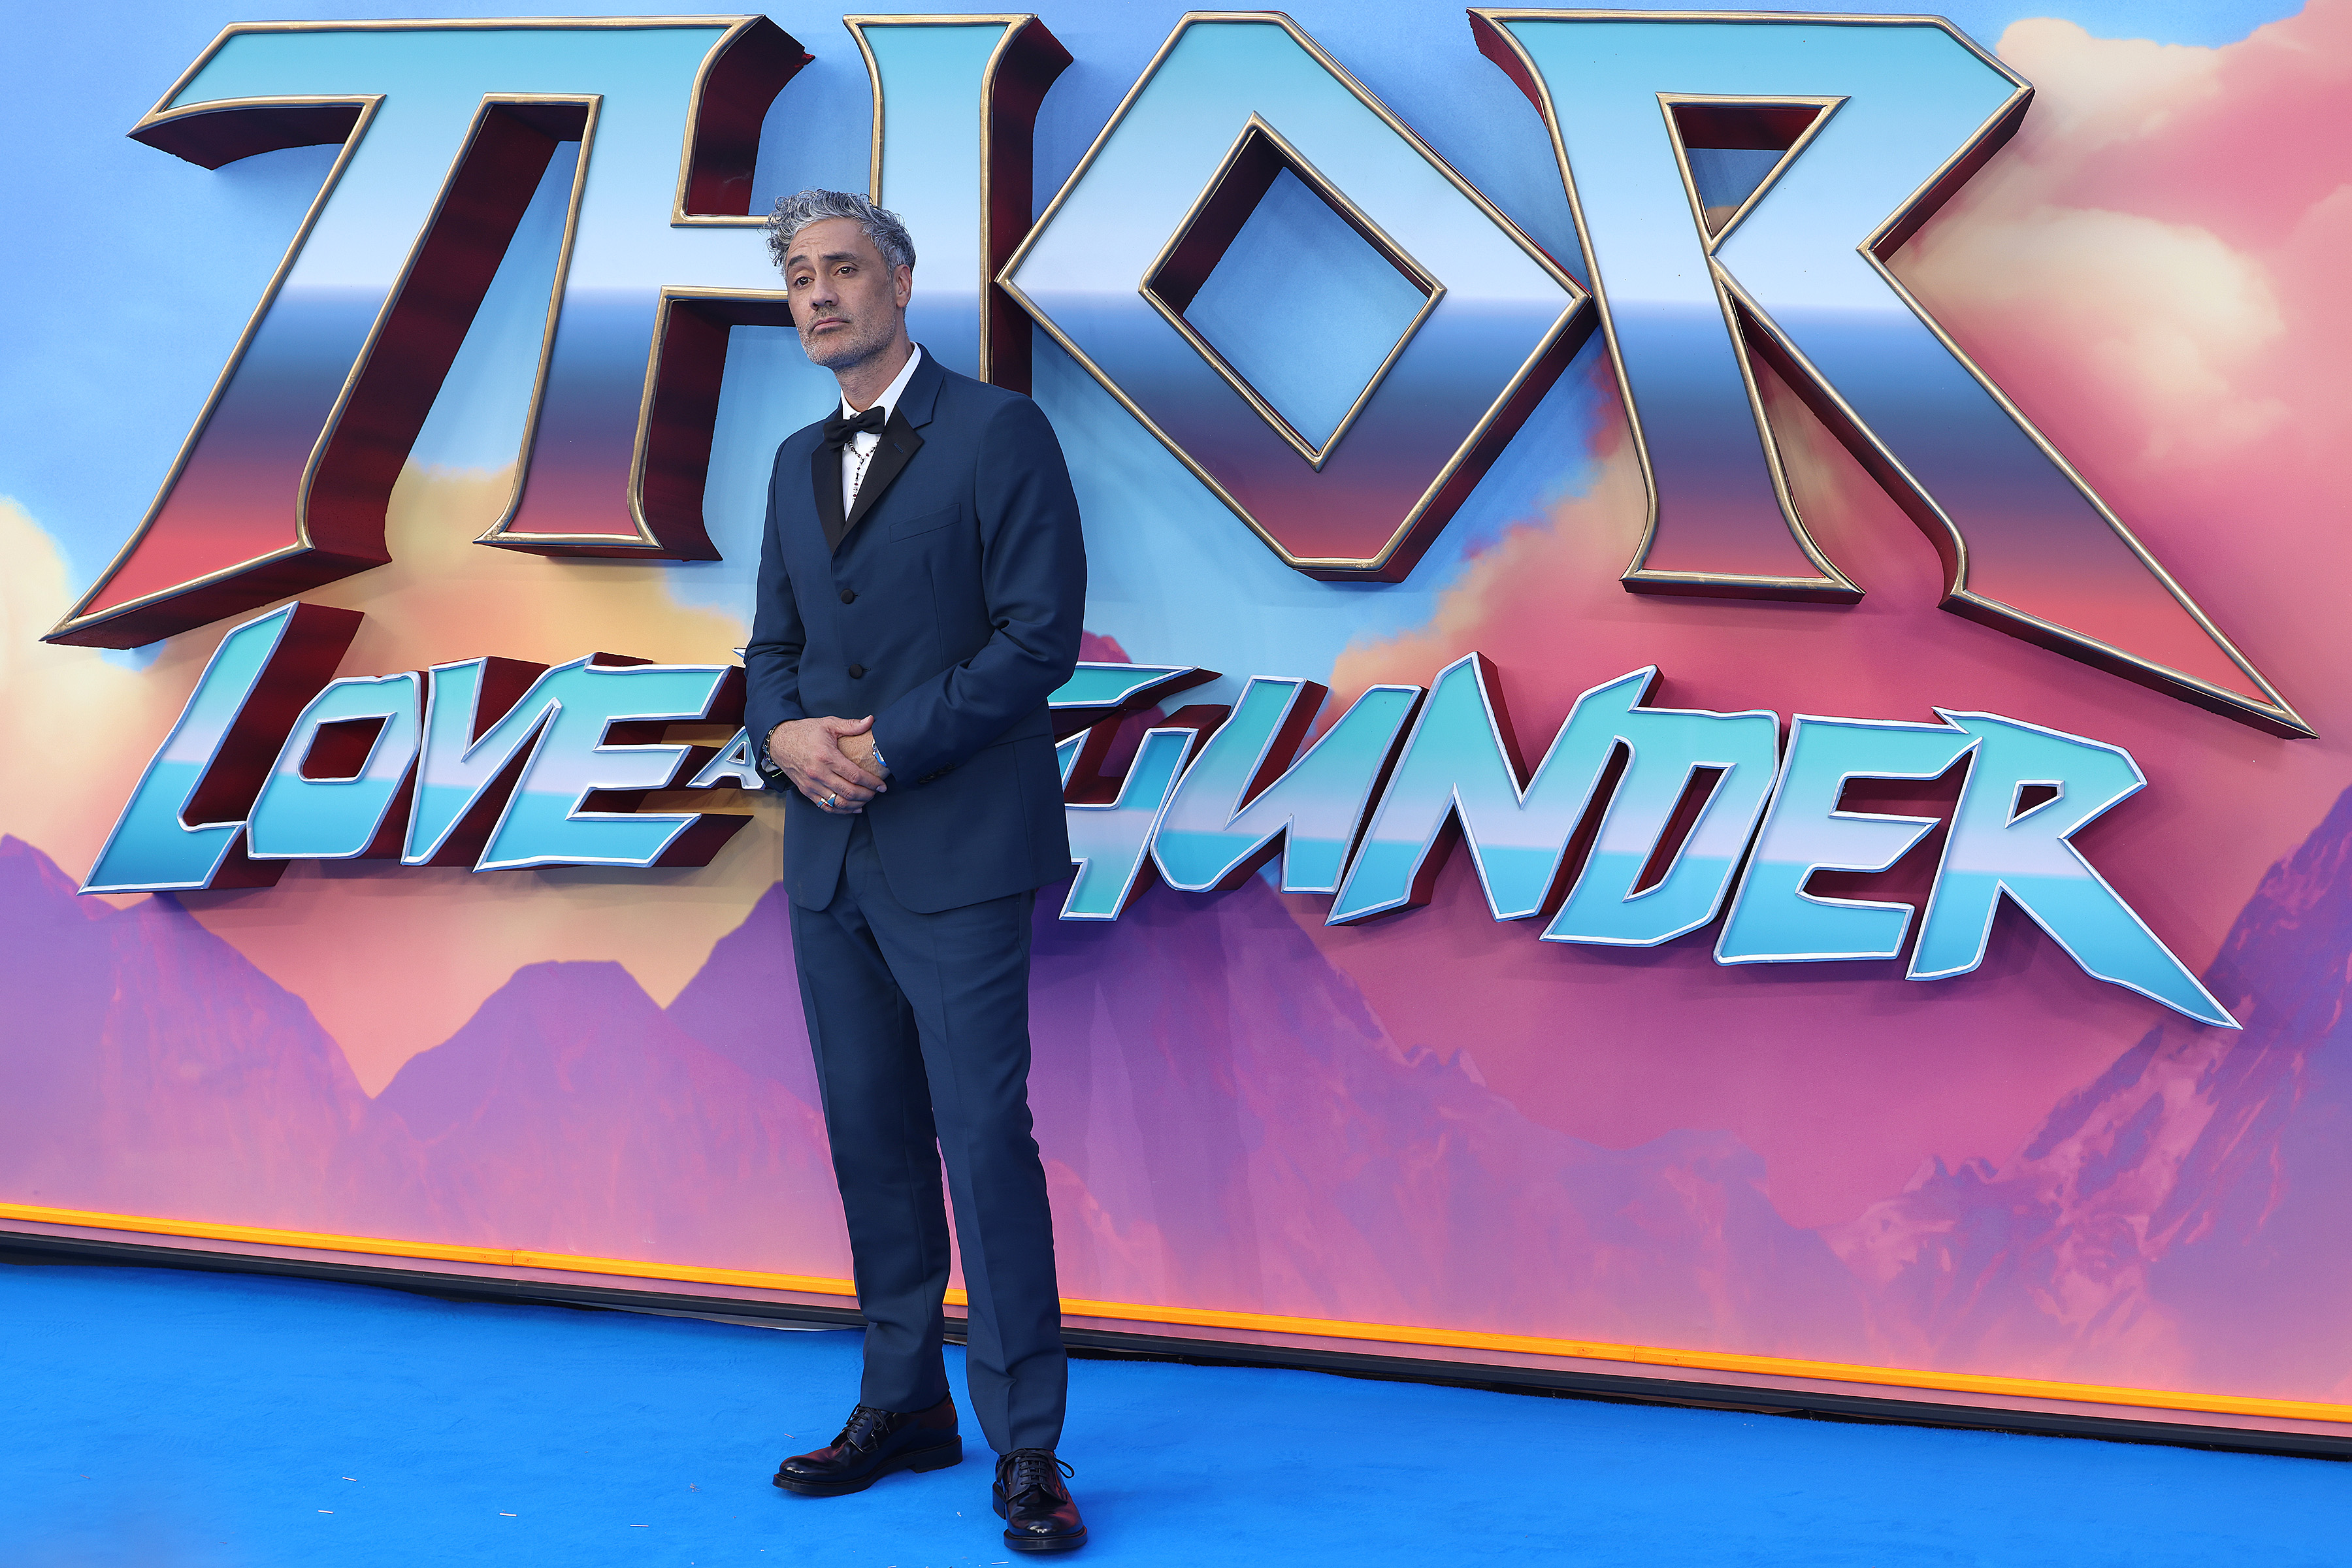 Taika Waititi attends a UK gala screening for Thor: Love and Thunder, which also features the Guardians of the Galaxy